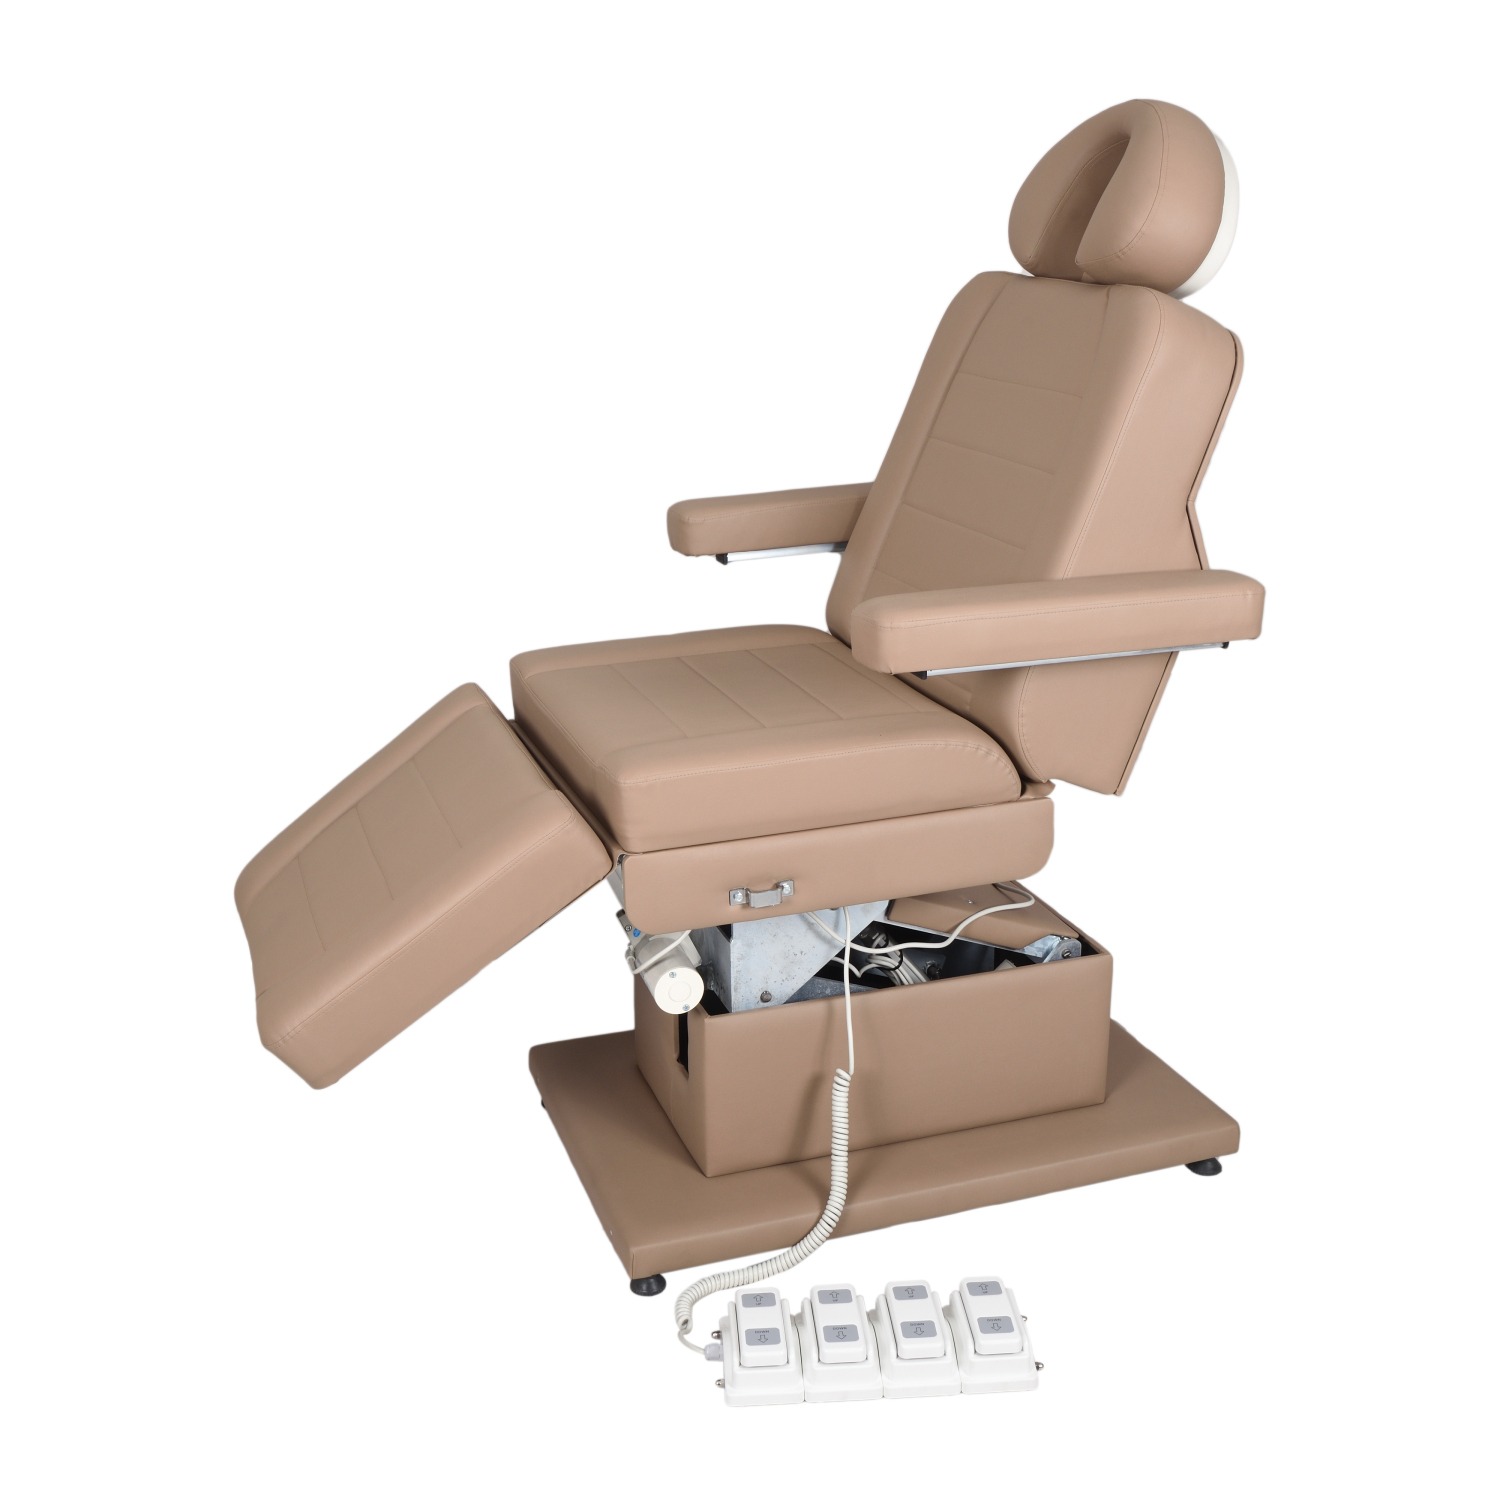 LUXURY Hair Transplant and Medical Aesthetic Chair (Brown)